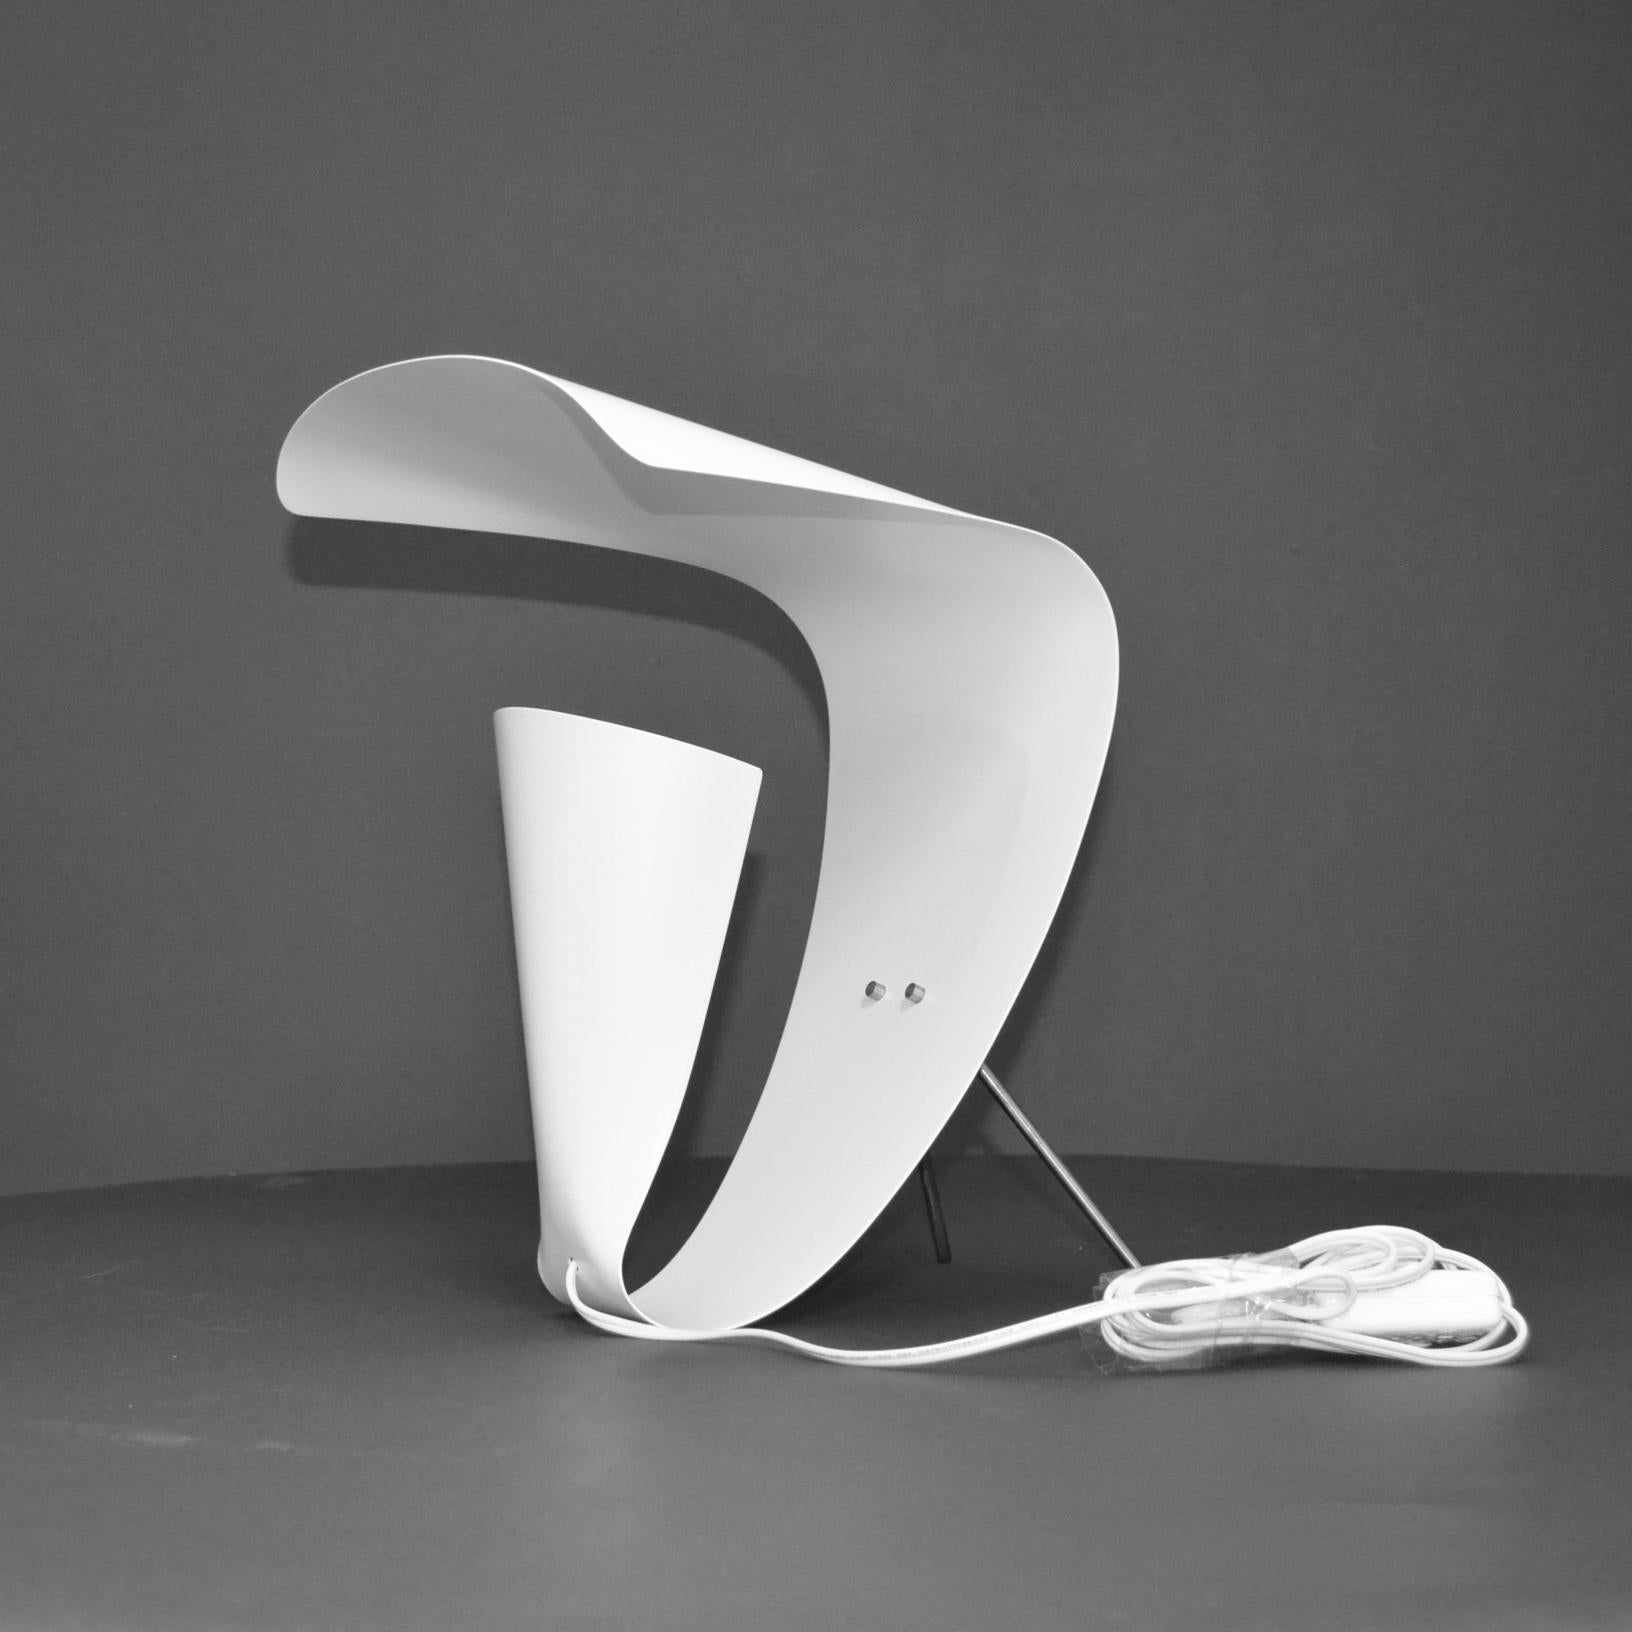 French Michel Buffet - White Desk Lamp B201 - IN STOCK! For Sale